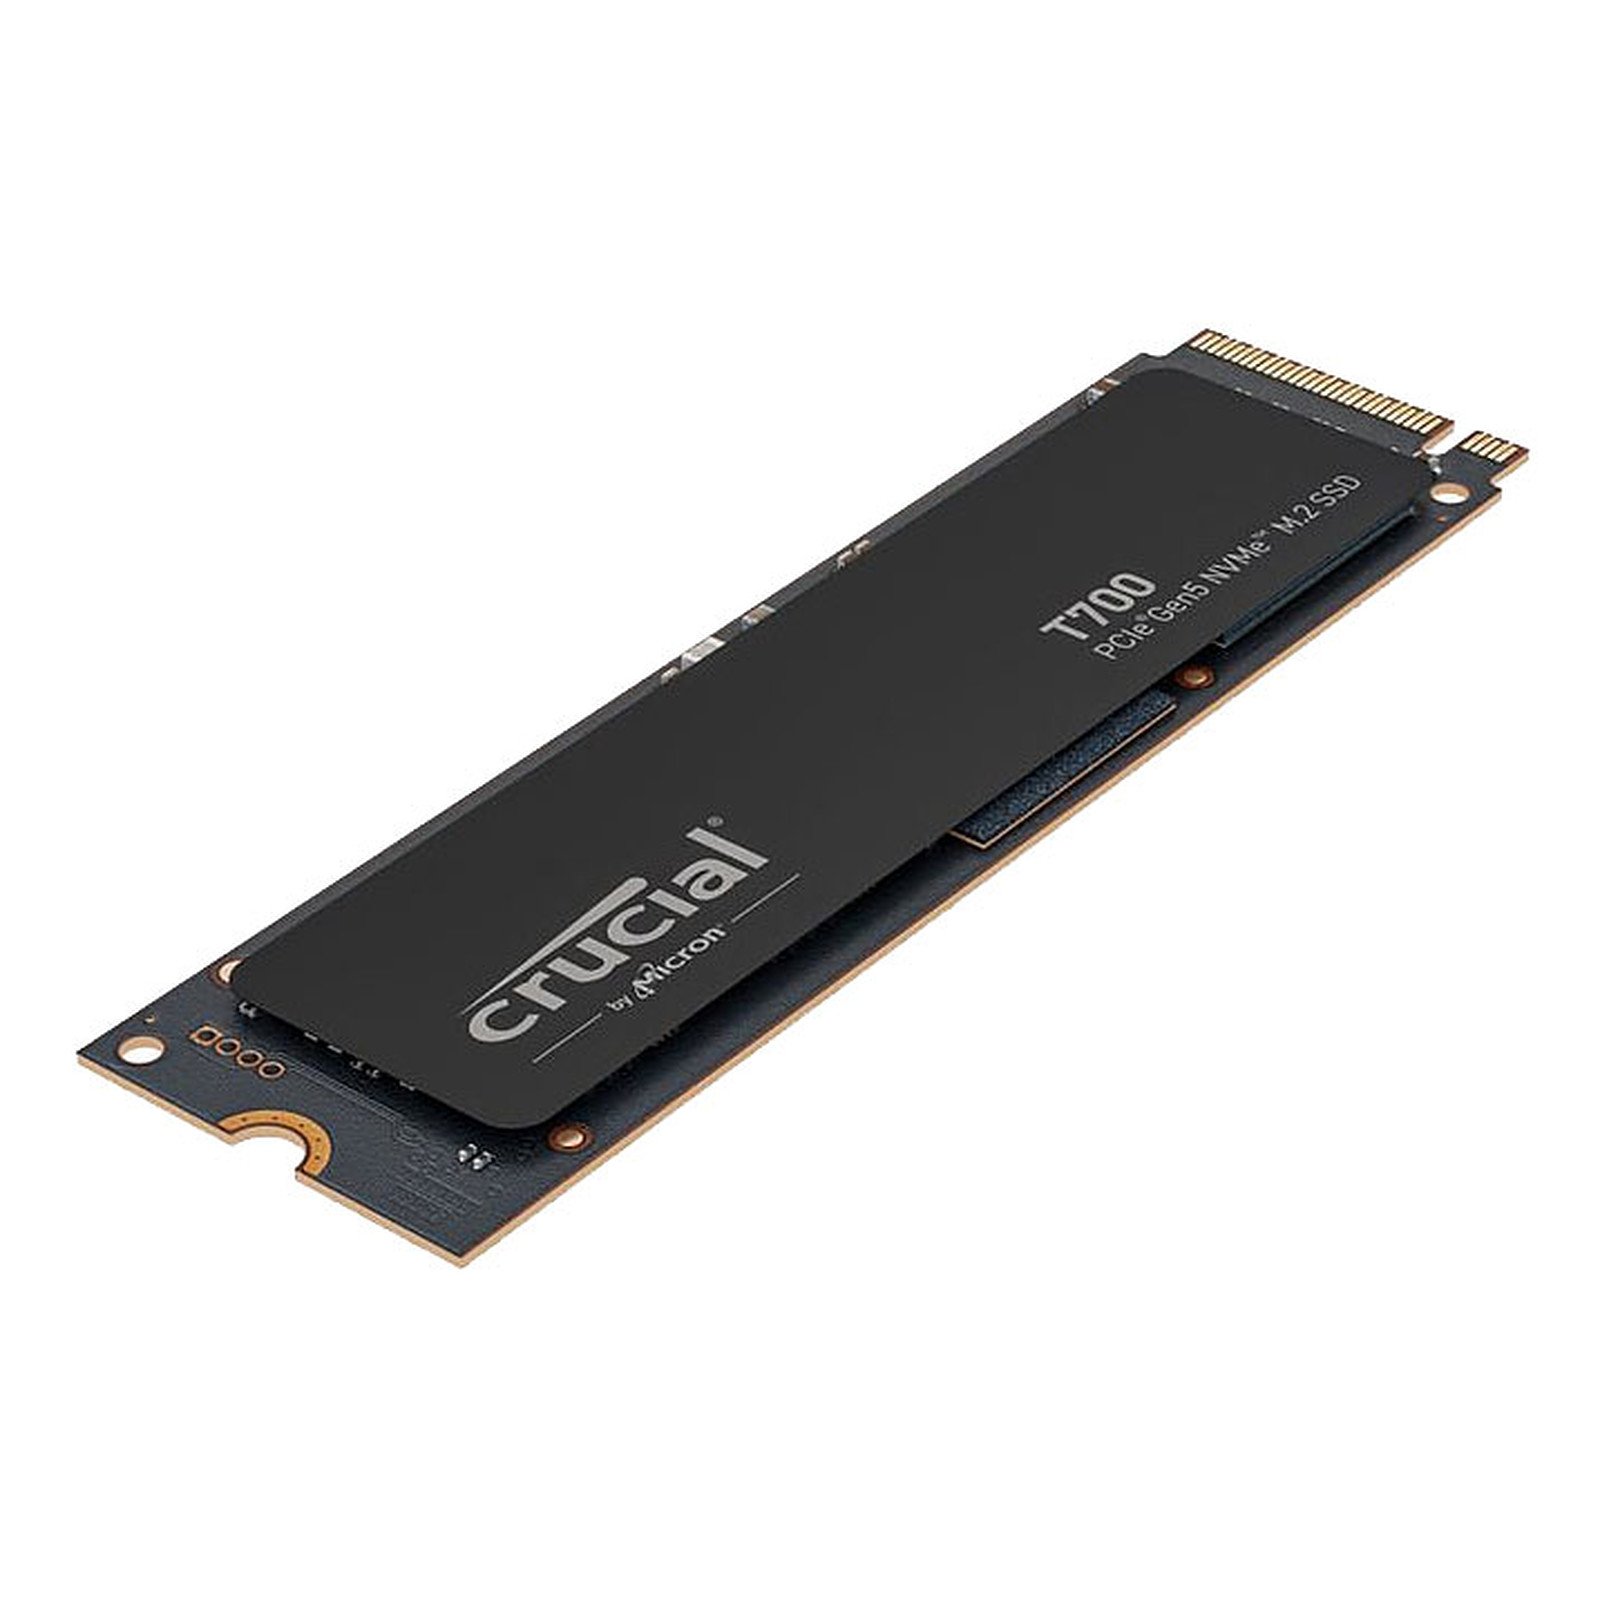 Disque dur SSD Crucial BX500 1 To SD 2.5 - 540 Mo/s